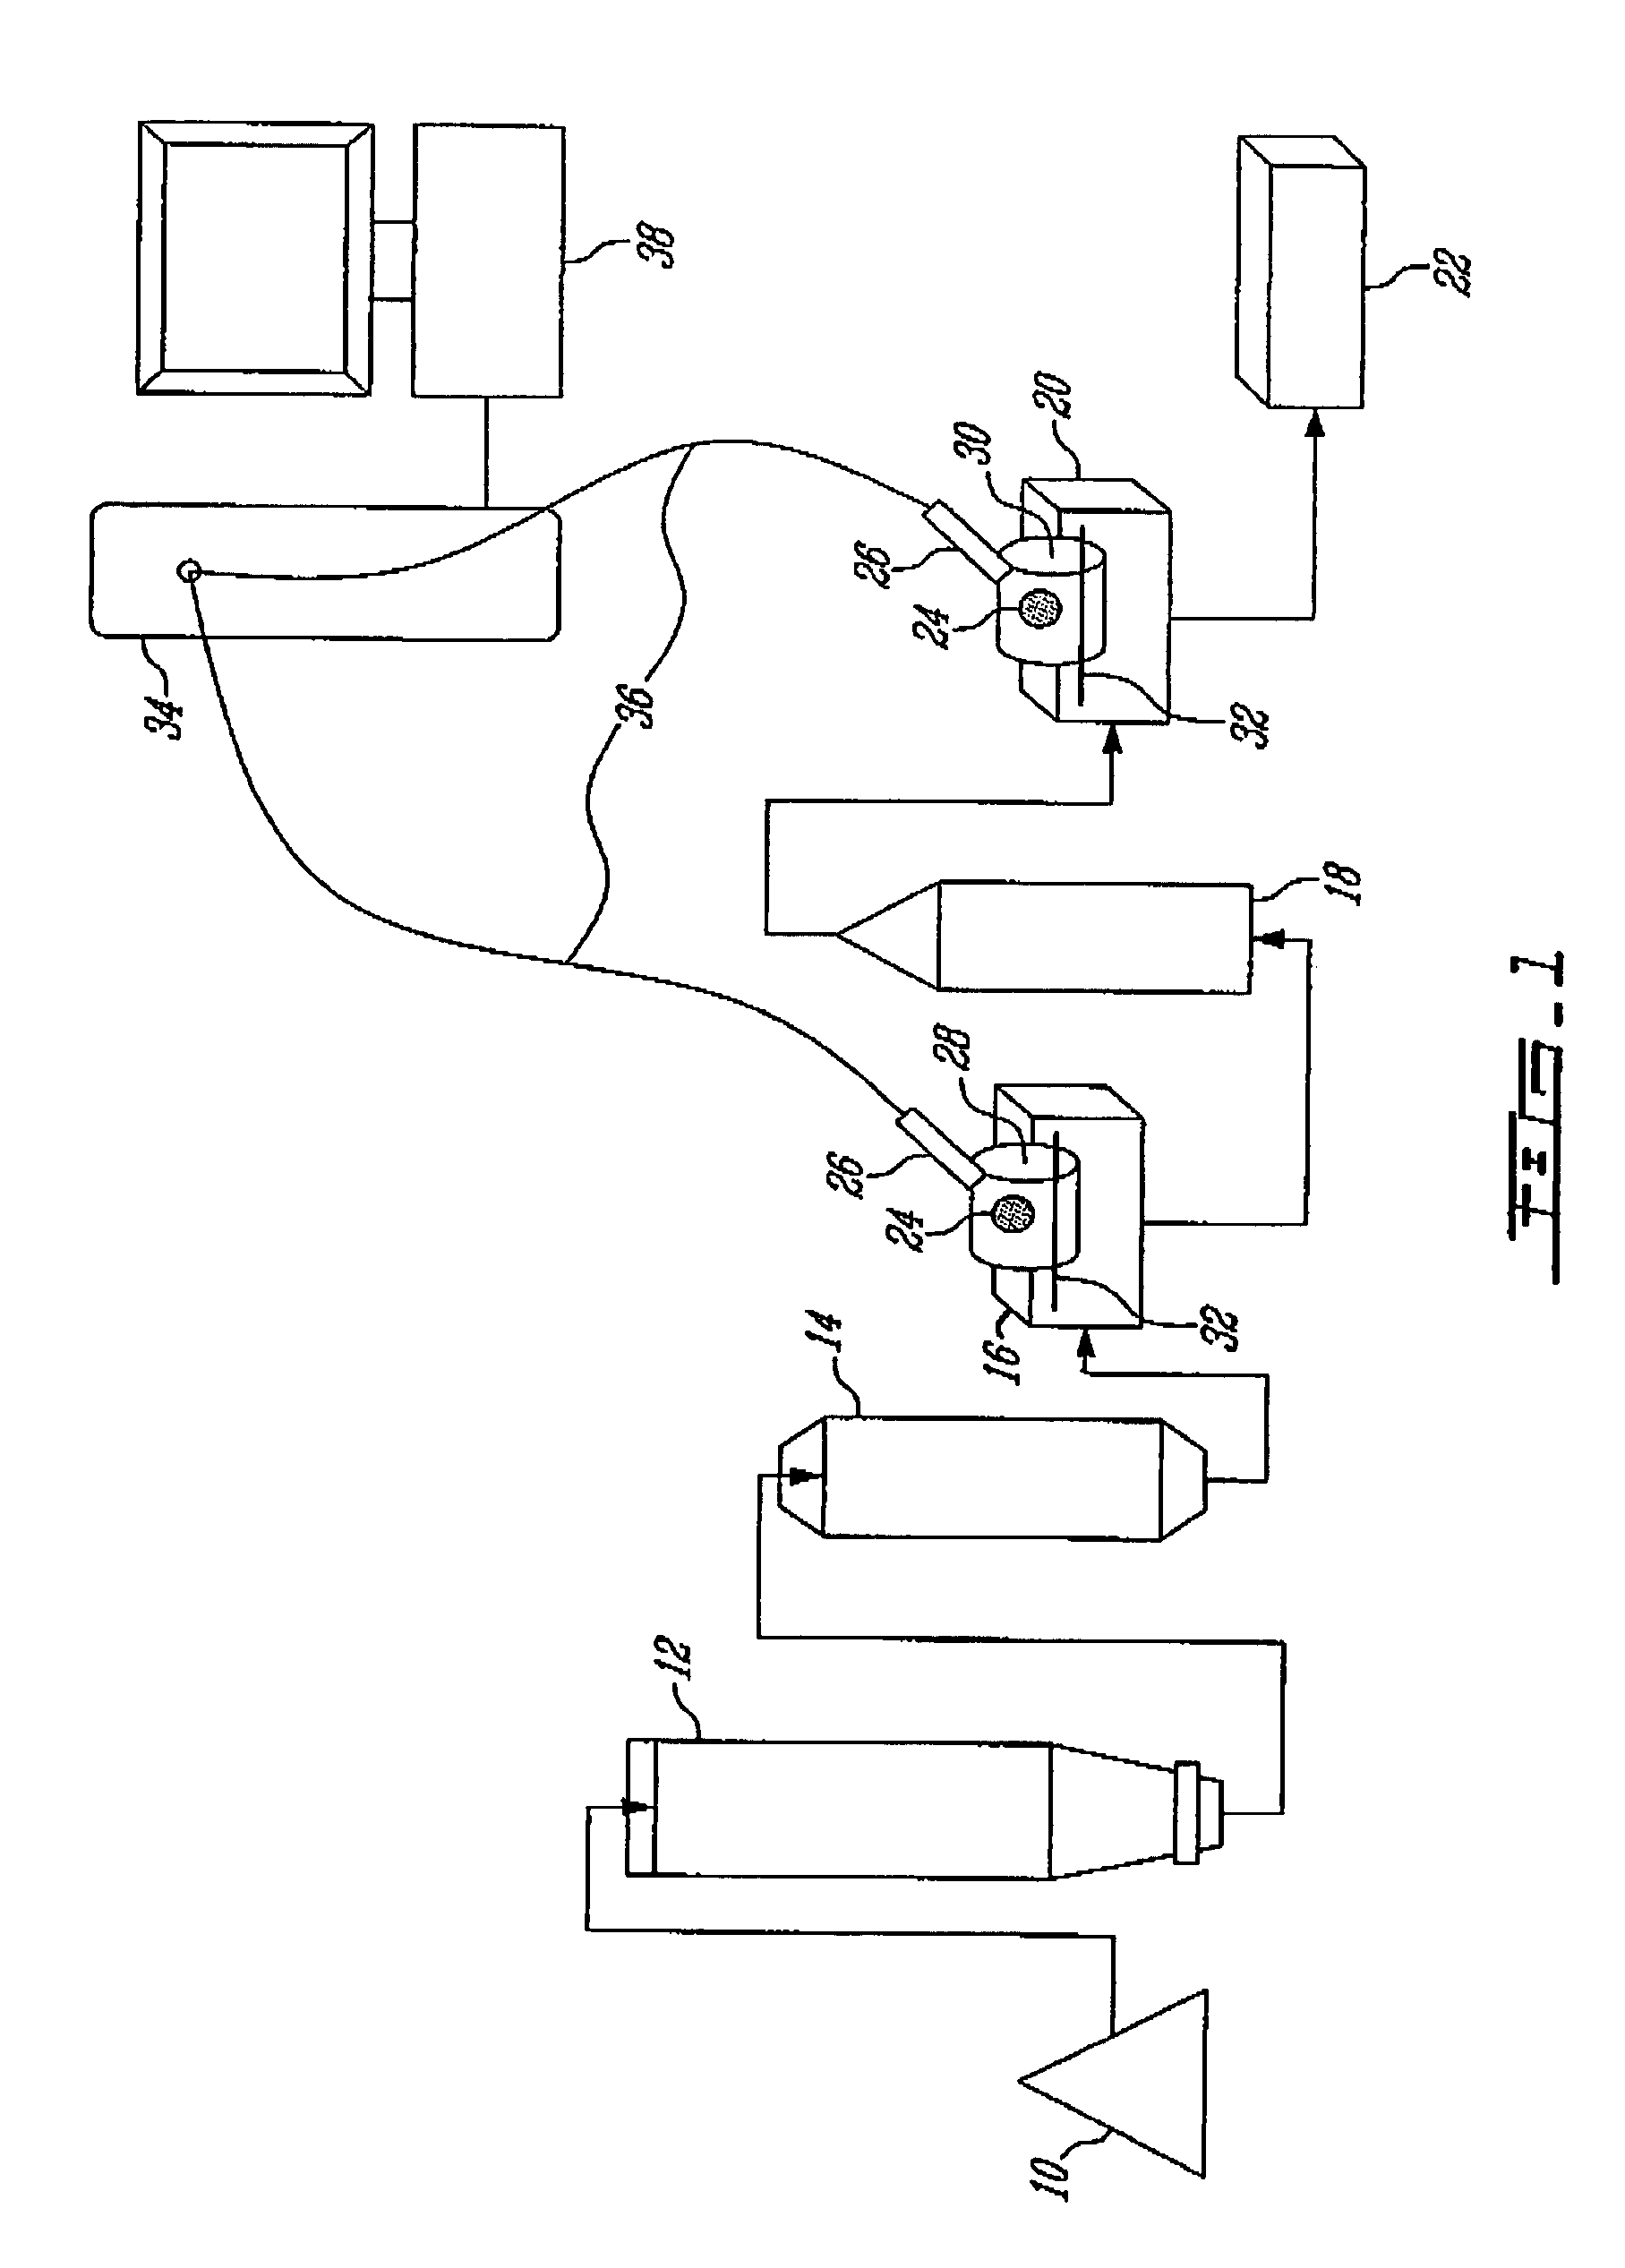 Method for determining chemical pulp kappa number with visible-near infrared spectrometry